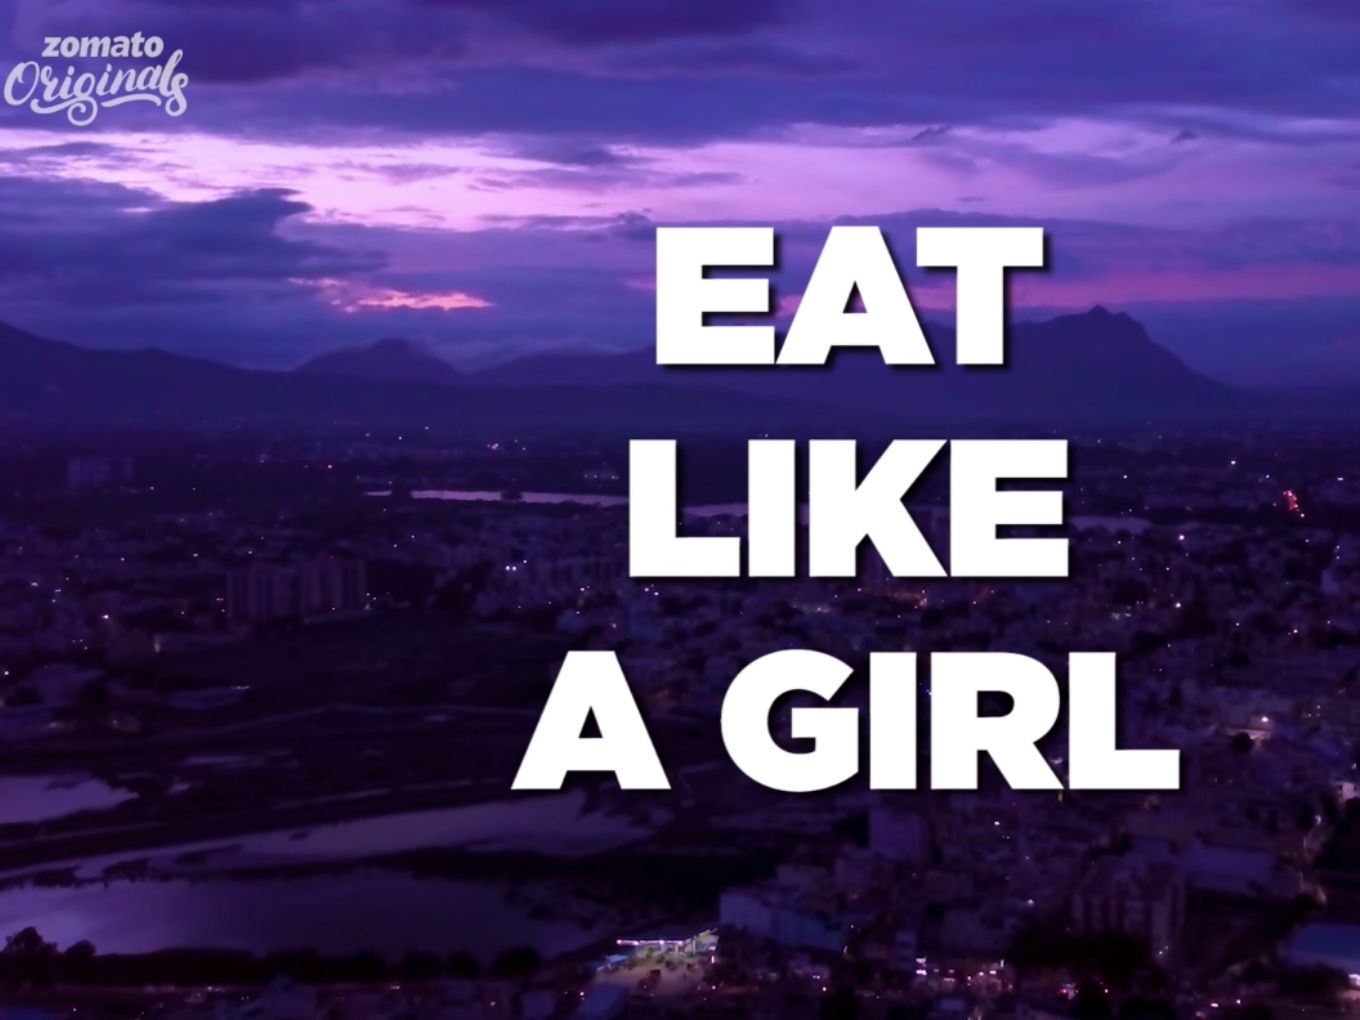 ‘Eat Like A Girl’: Zomato’s Extreme Food Show To Dare Your Inner Foodie